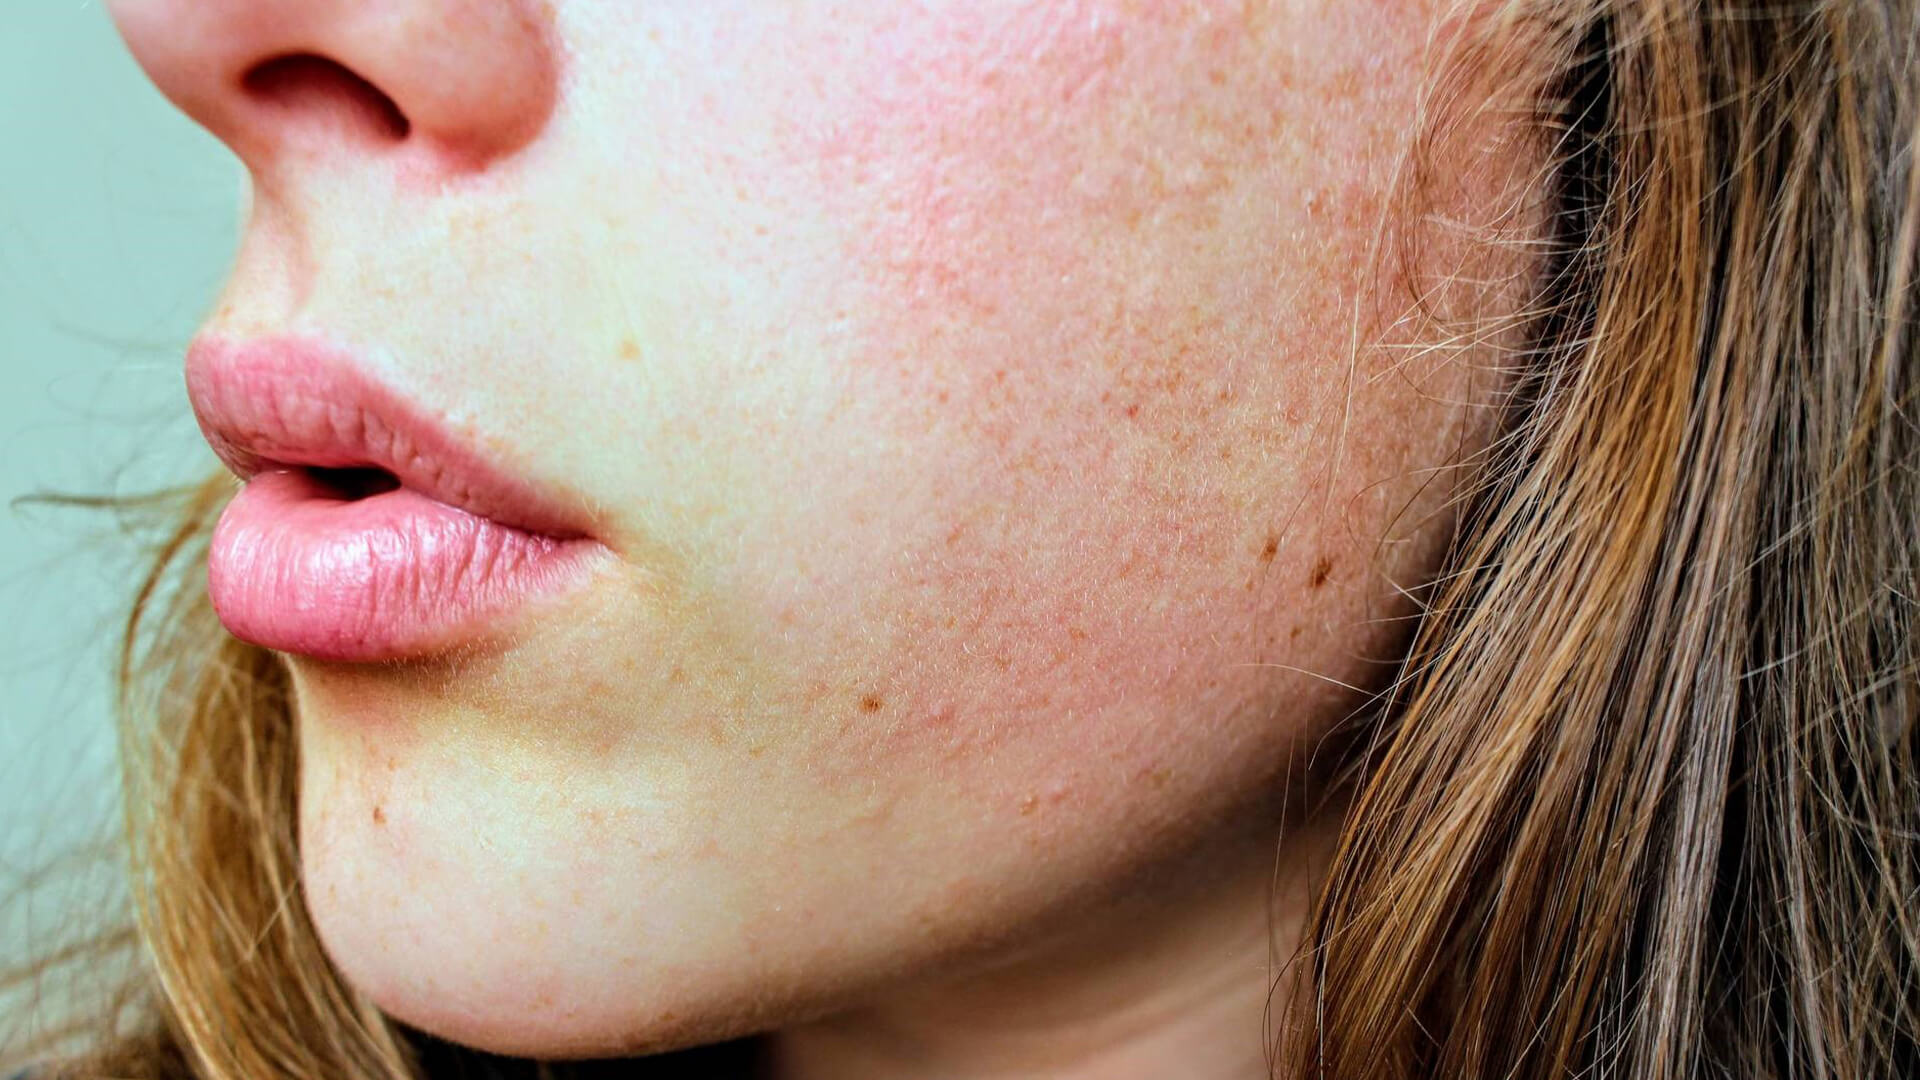 7 Common Rosacea Triggers, According To A Skin Specialist